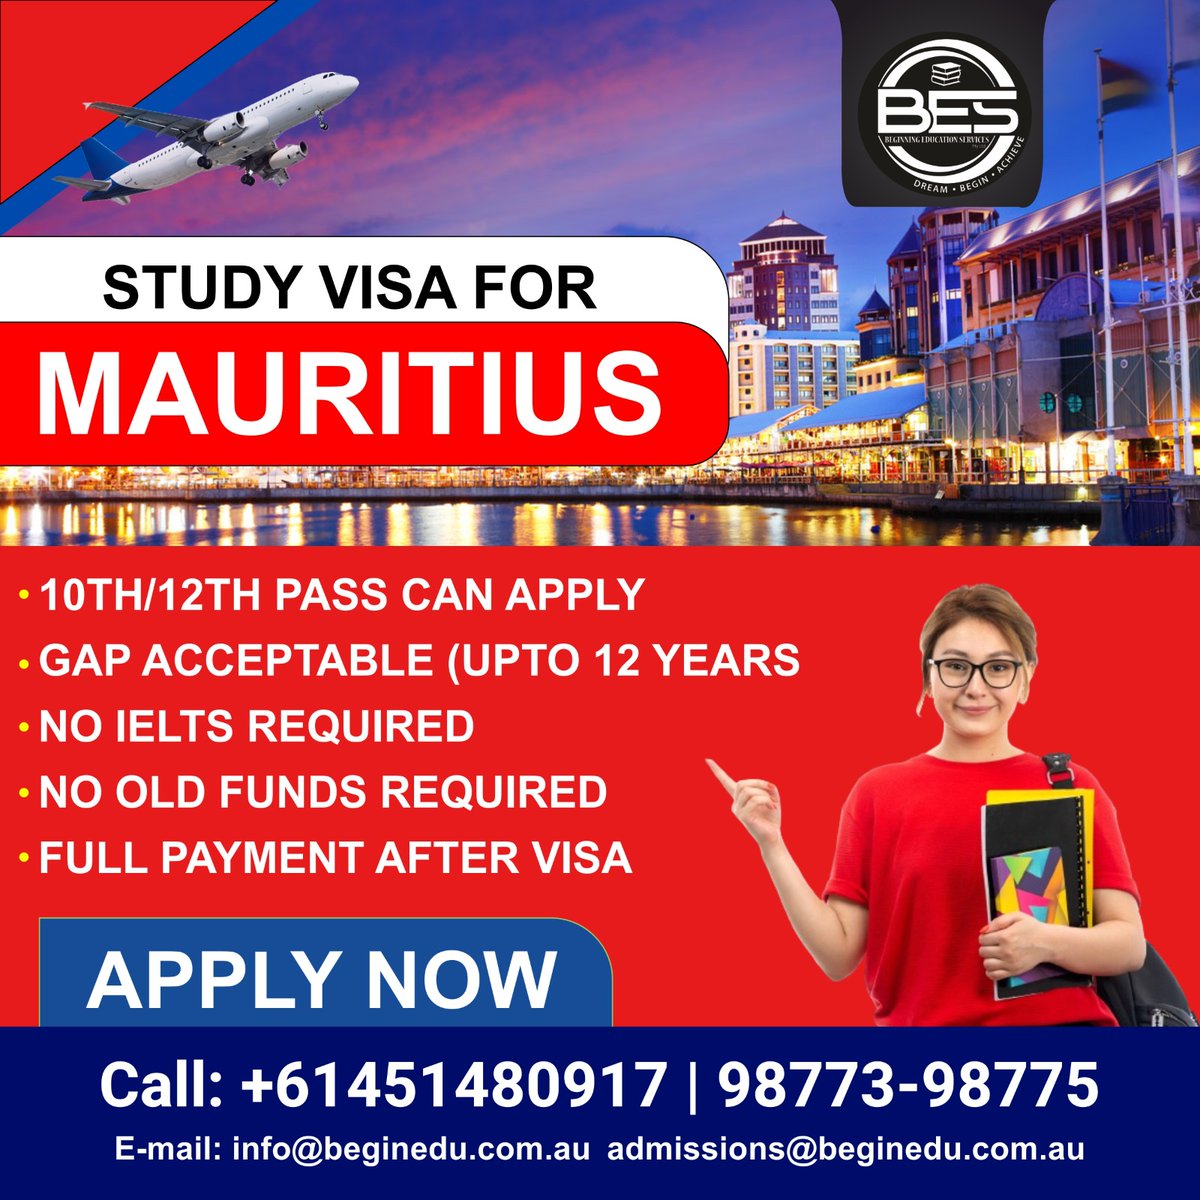 Study abroad without worrying about the high costs. 📚

Excellent opportunity. 

 📲 +61 451 480 917 / +91 98773 - 98775.

✉️ info@beginedu.com.au.

#StudyVisa #StudyAbroad  #Mauritius #Punjab #Opportunity  #VisaExpert #VisaService  #VisaAgent #StudentVisa #NoIELTS #MauritiusVisa